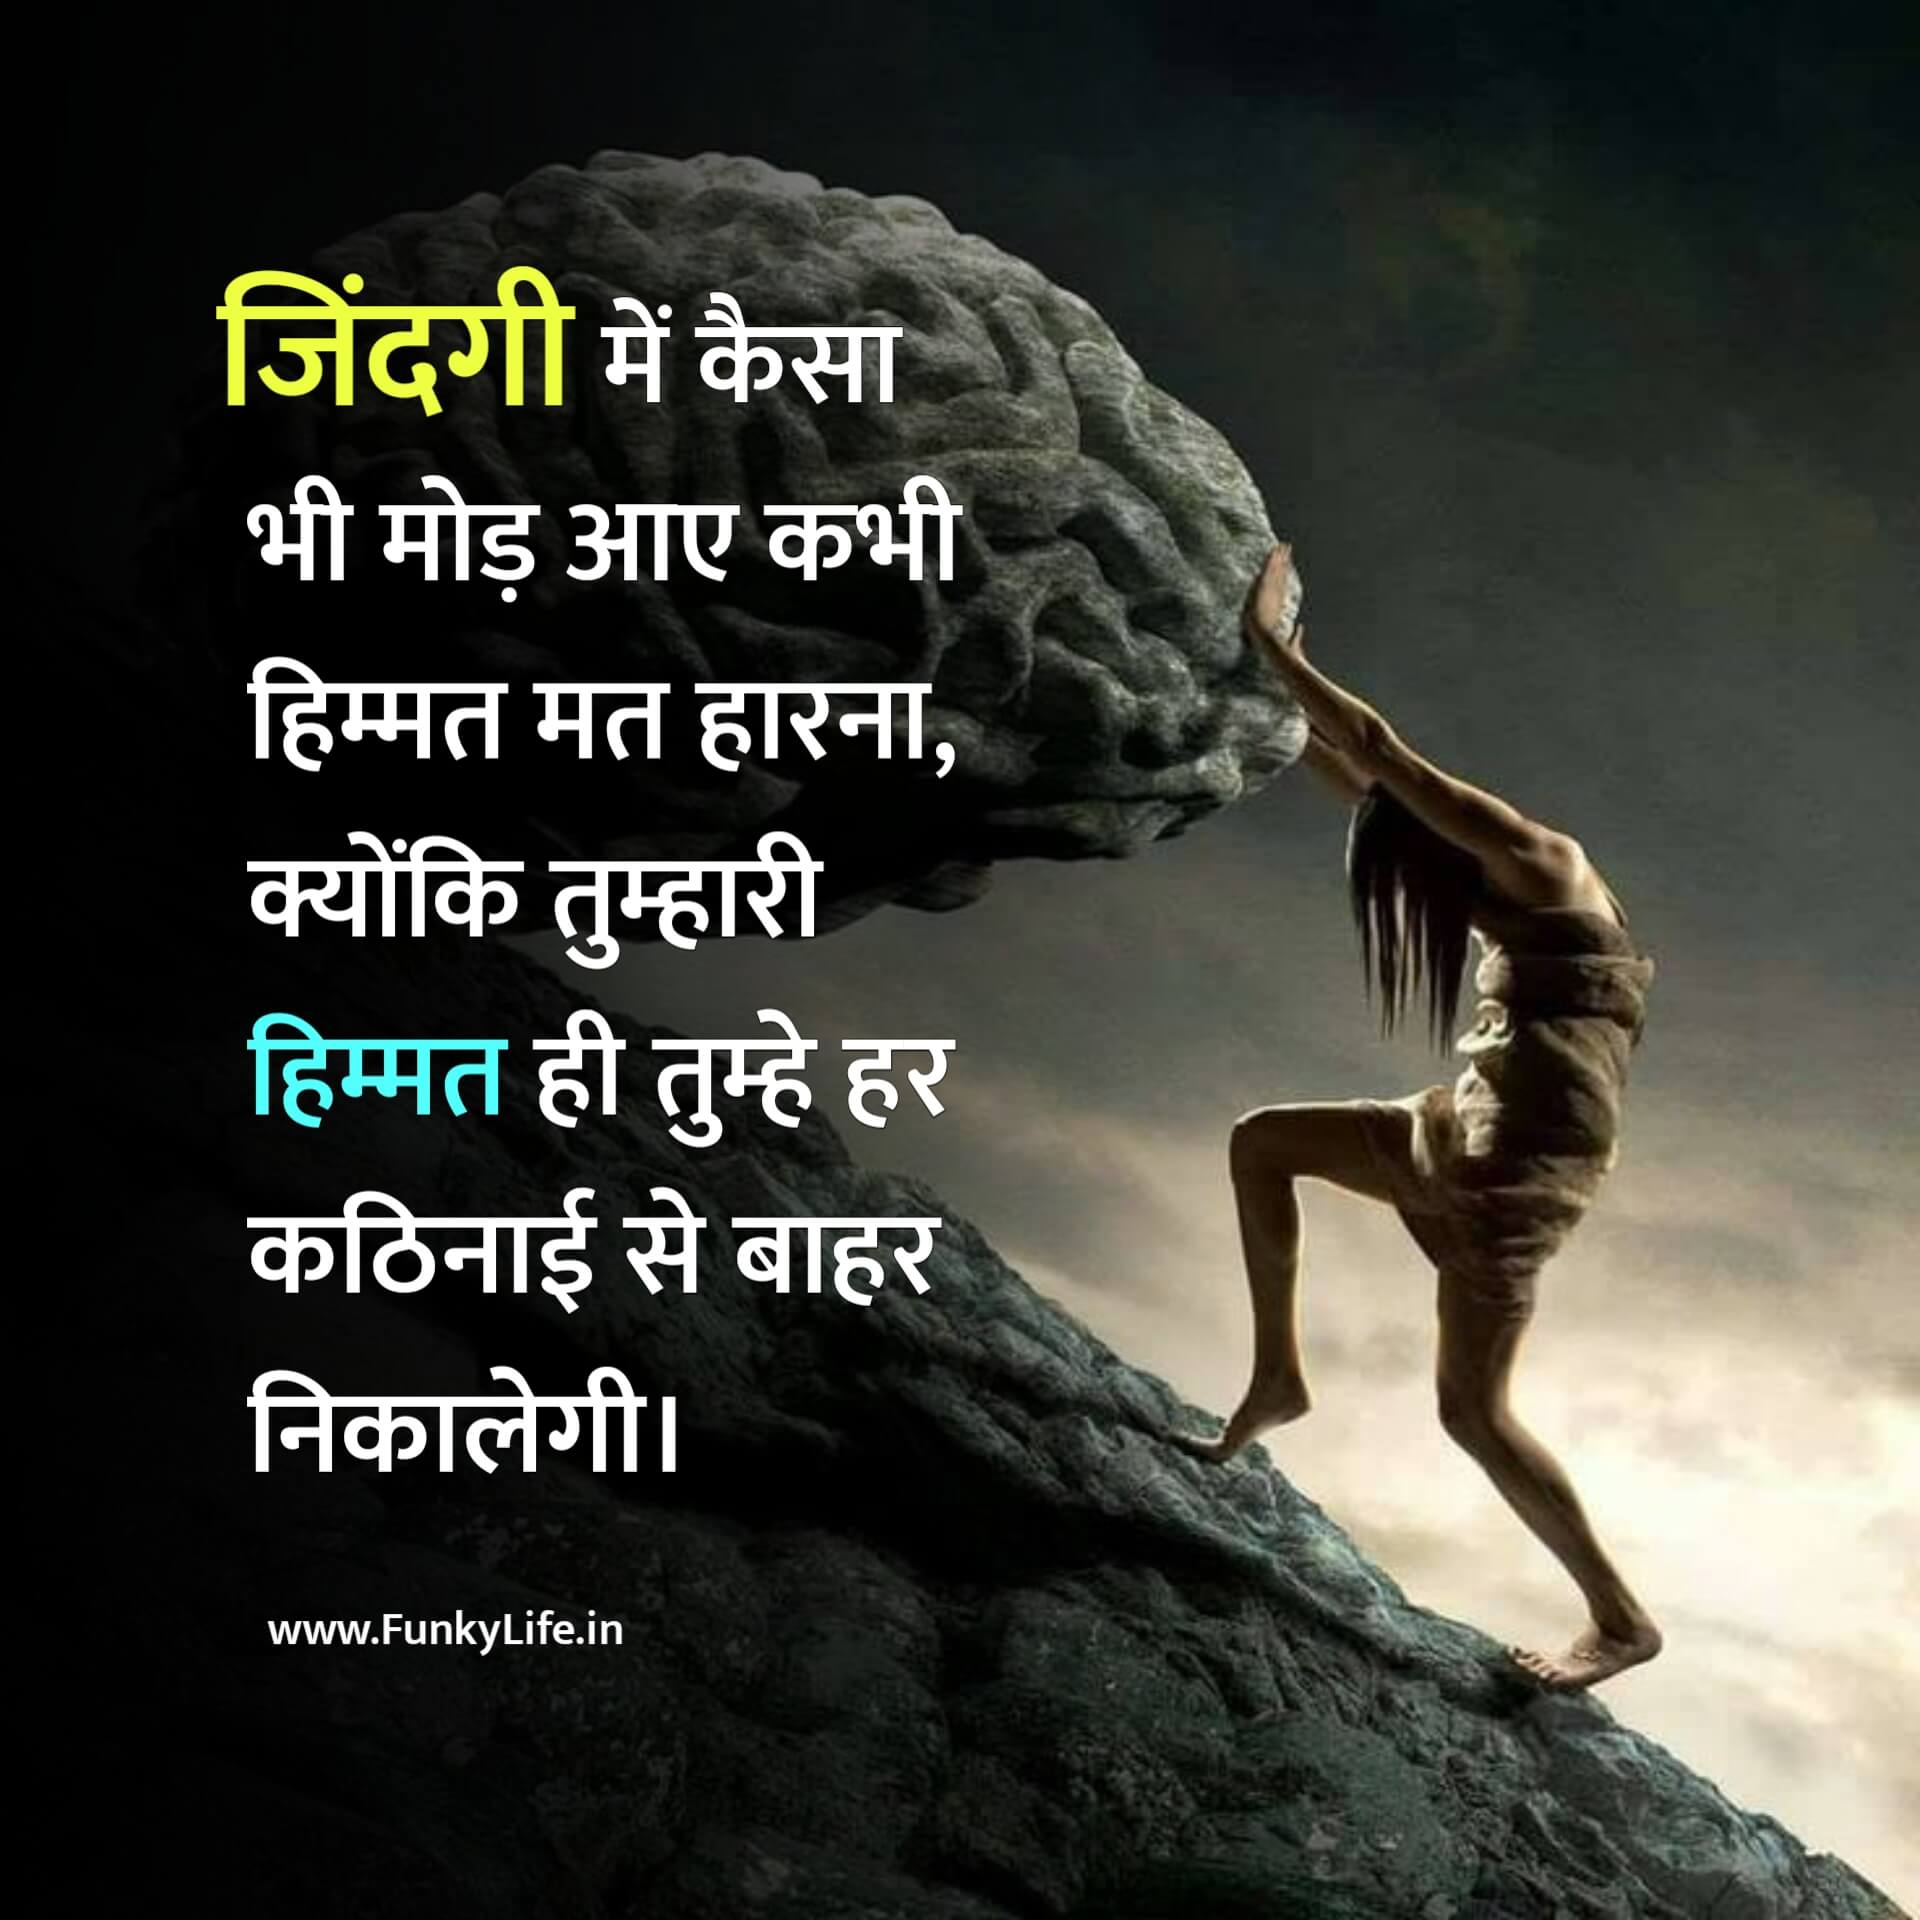 Motivational Quote on life in Hindi